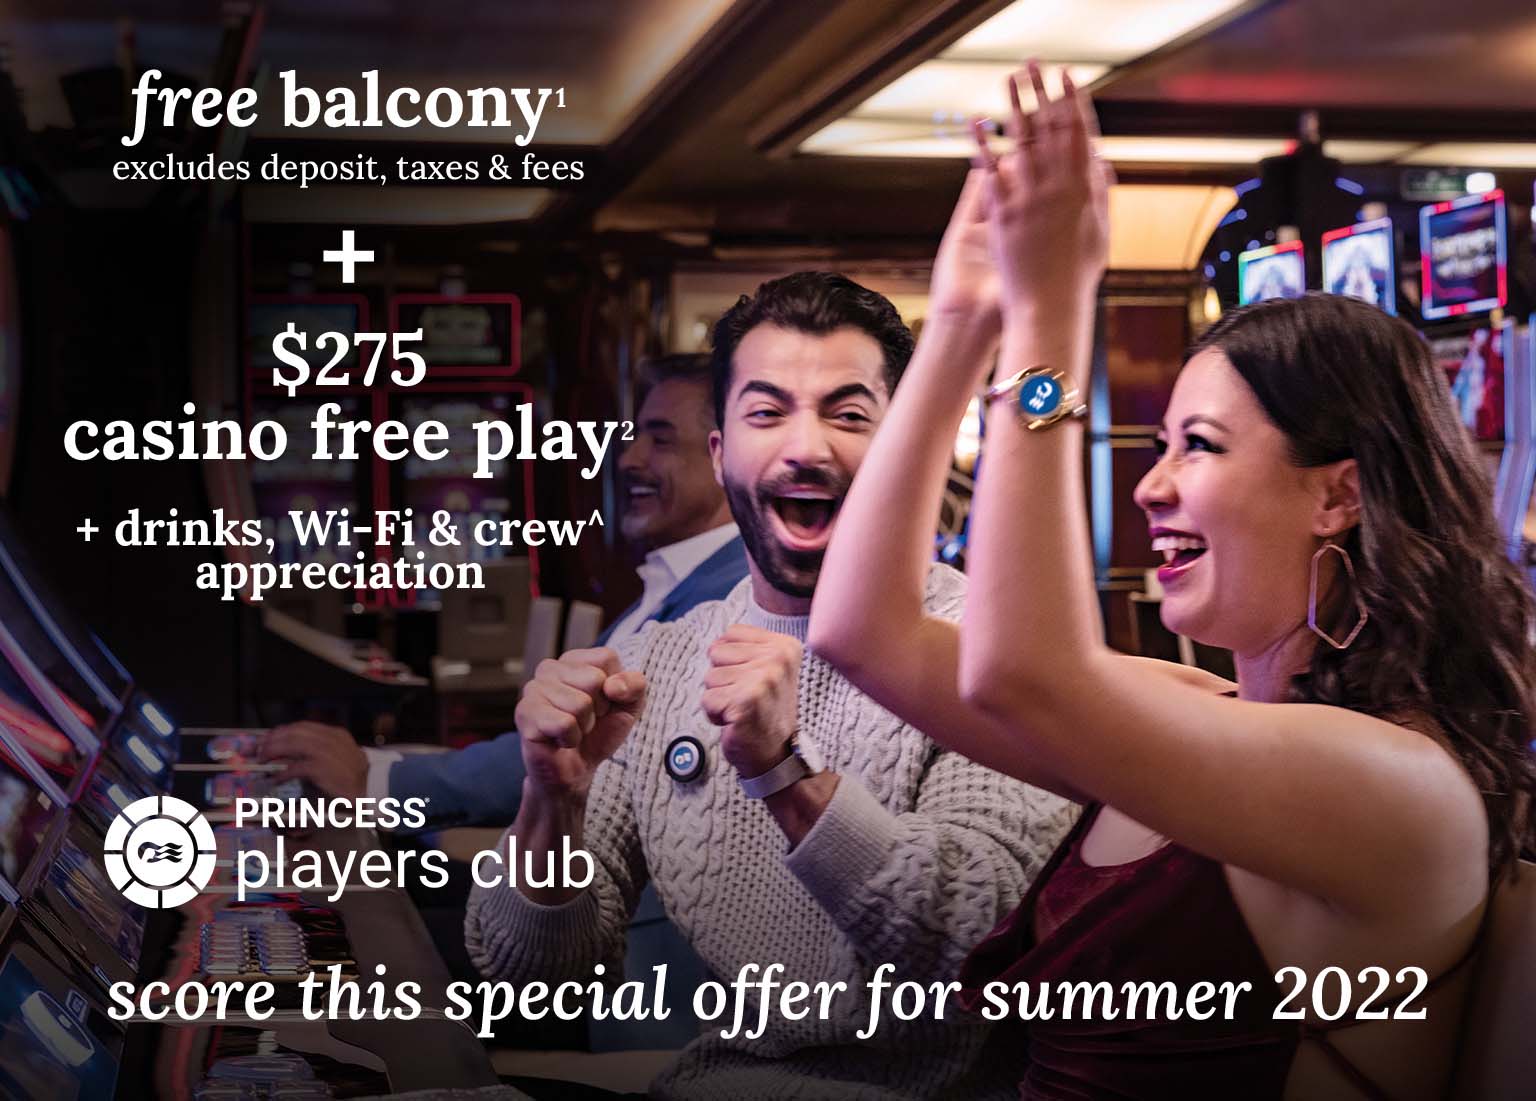 free balcony stateroom + $275 casino free play + drinks, Wi-Fi & crew appreciation included. Click here to book.